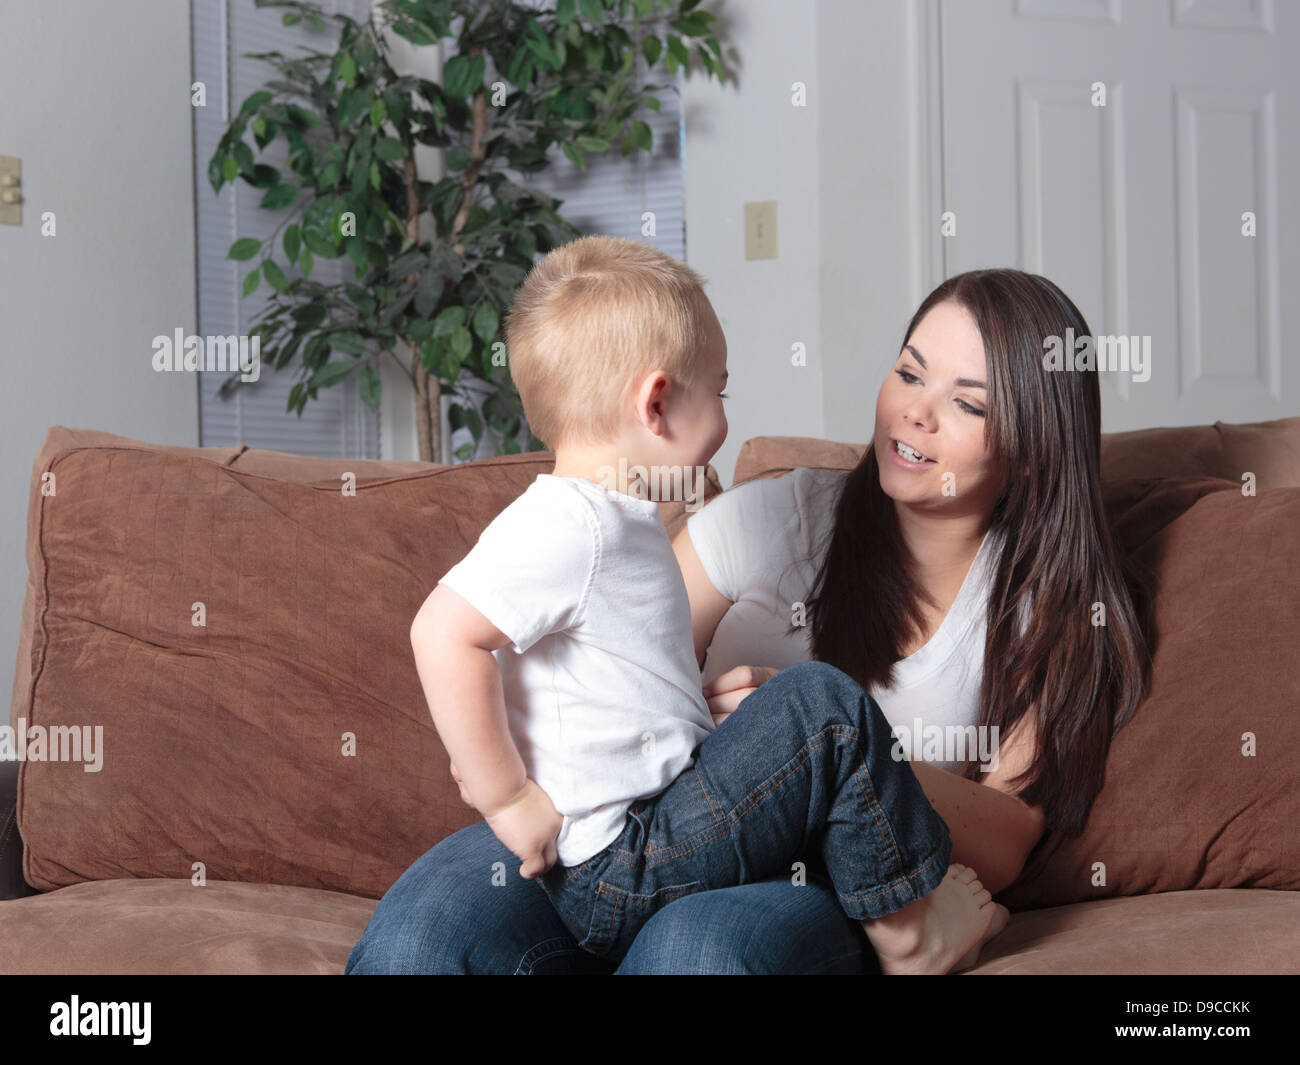 Mother and her young son sitting on the couch together at home in lifestyle setting casually playing together loving and bonding Stock Photo